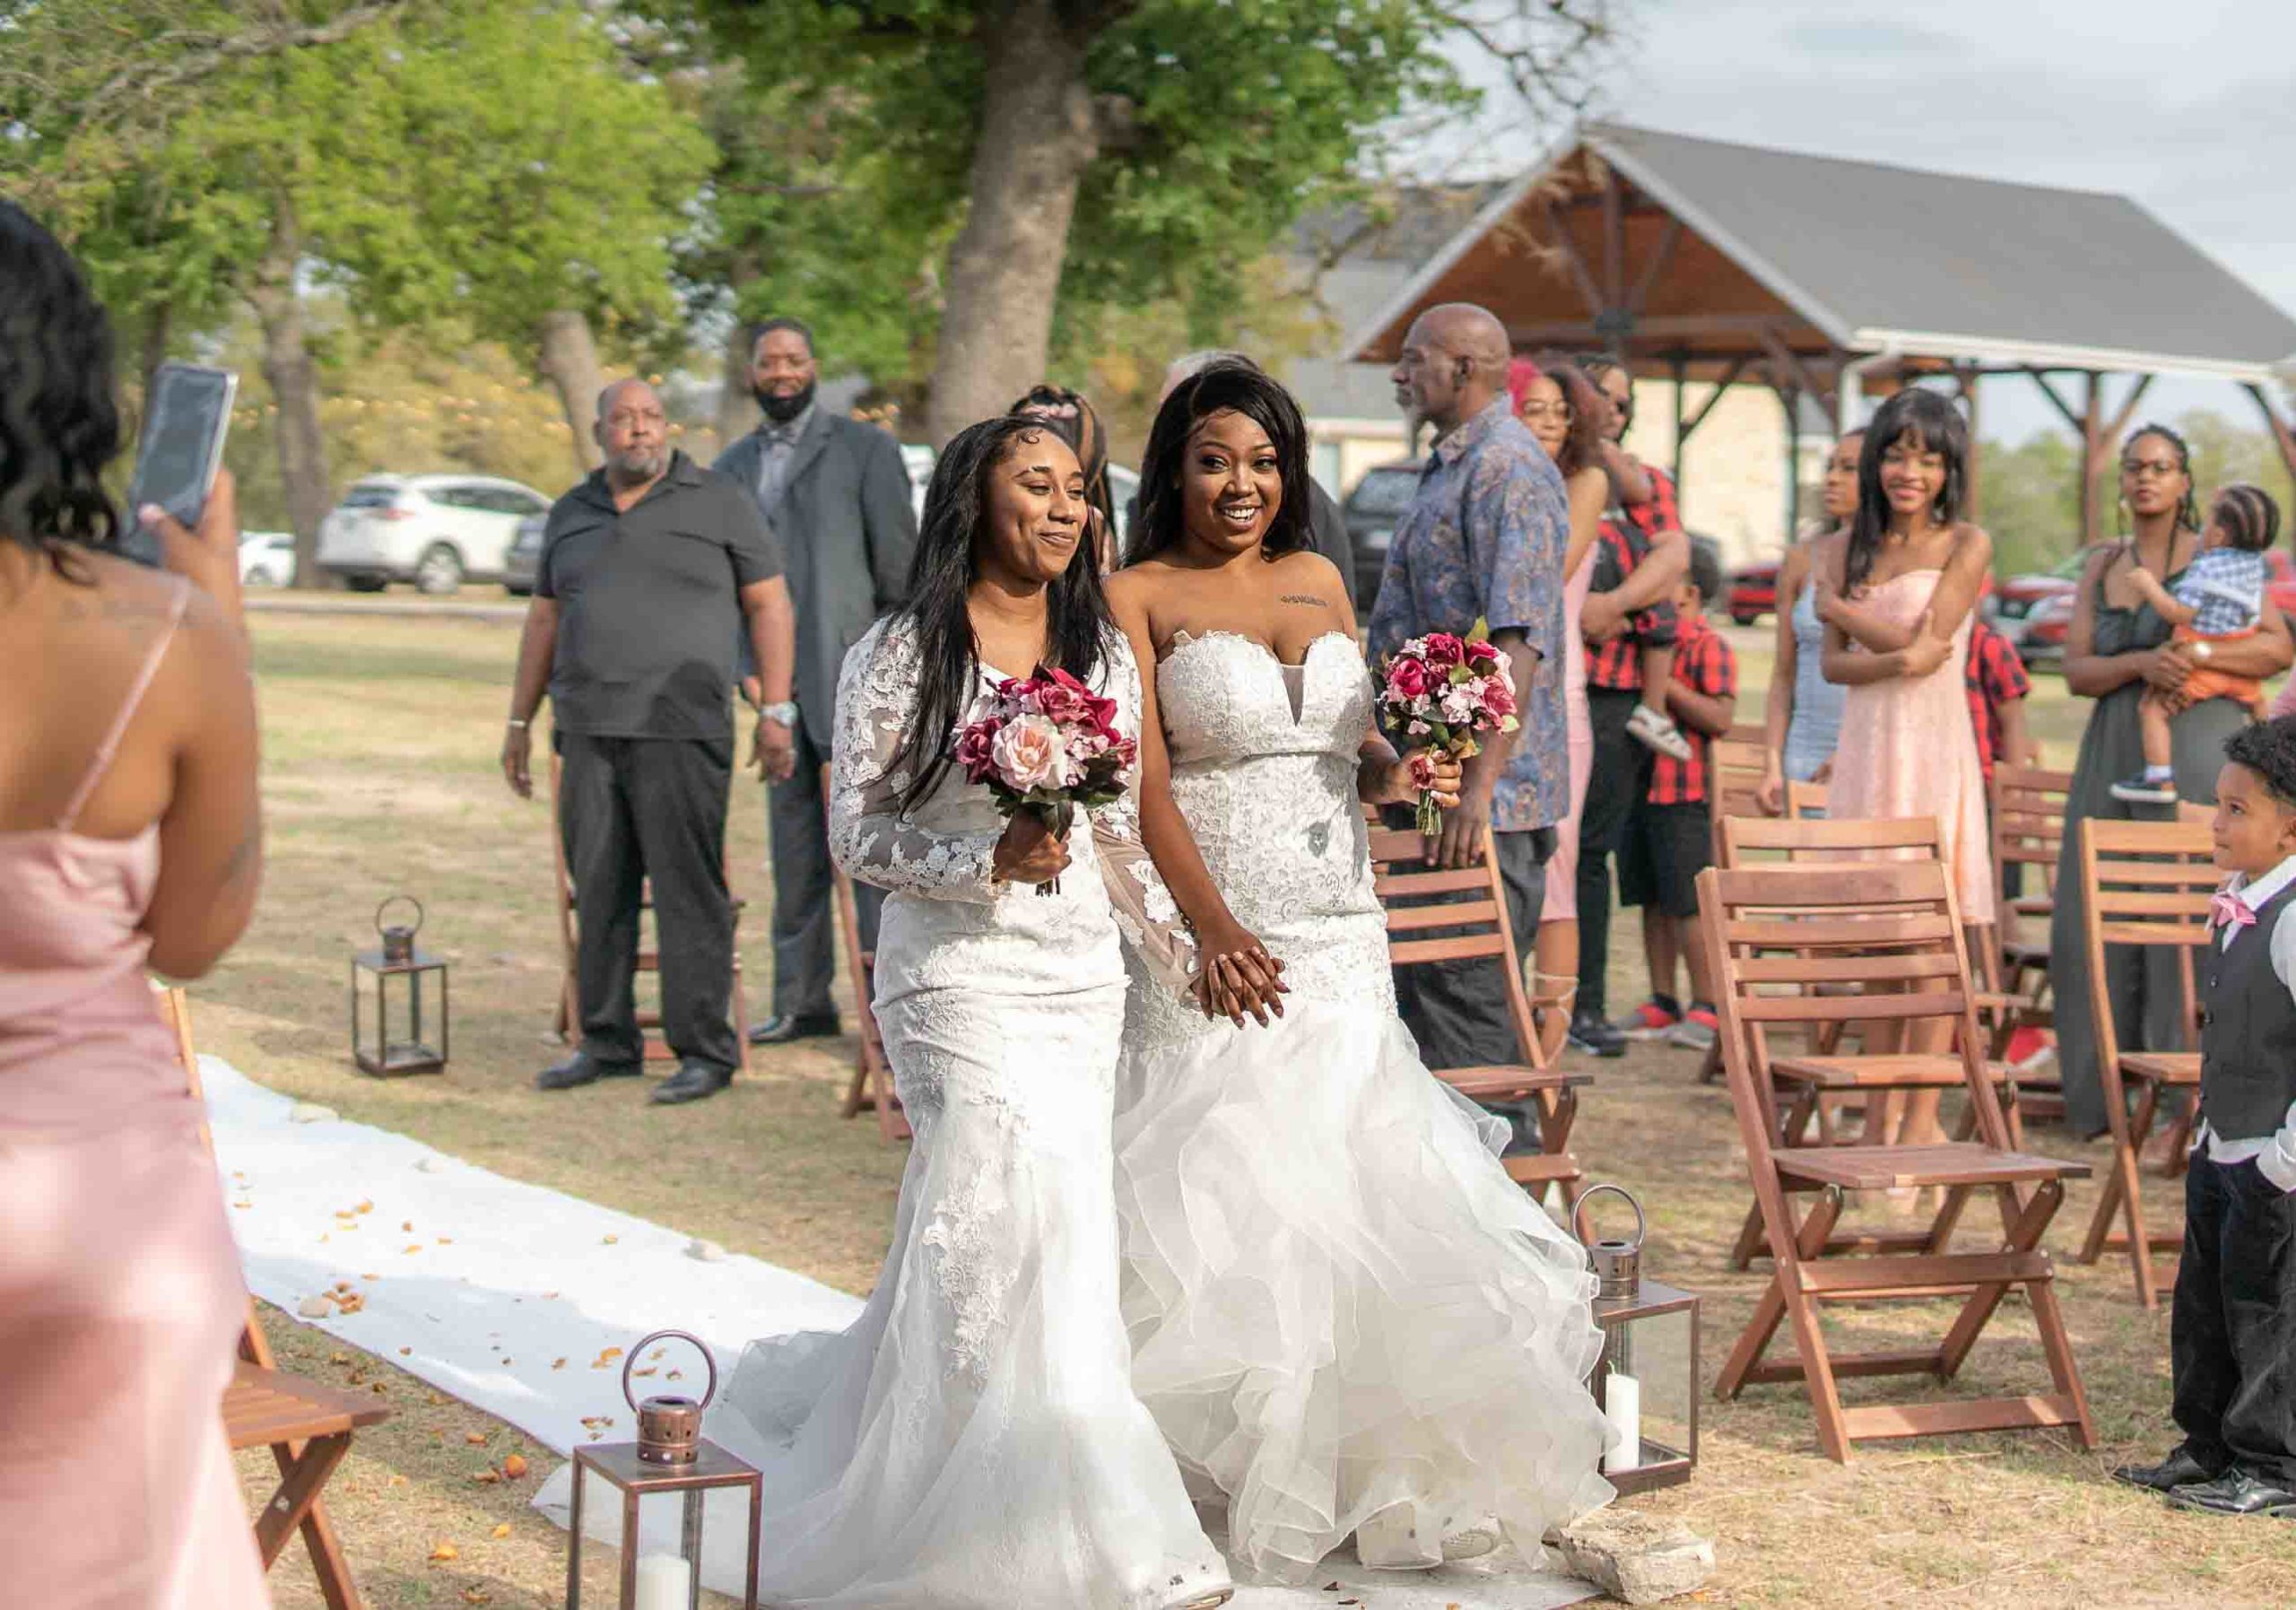 two Black lesbian brides smile as they walk up the aisle together holding hands and bouquets with pink flowers as wedding guests watch